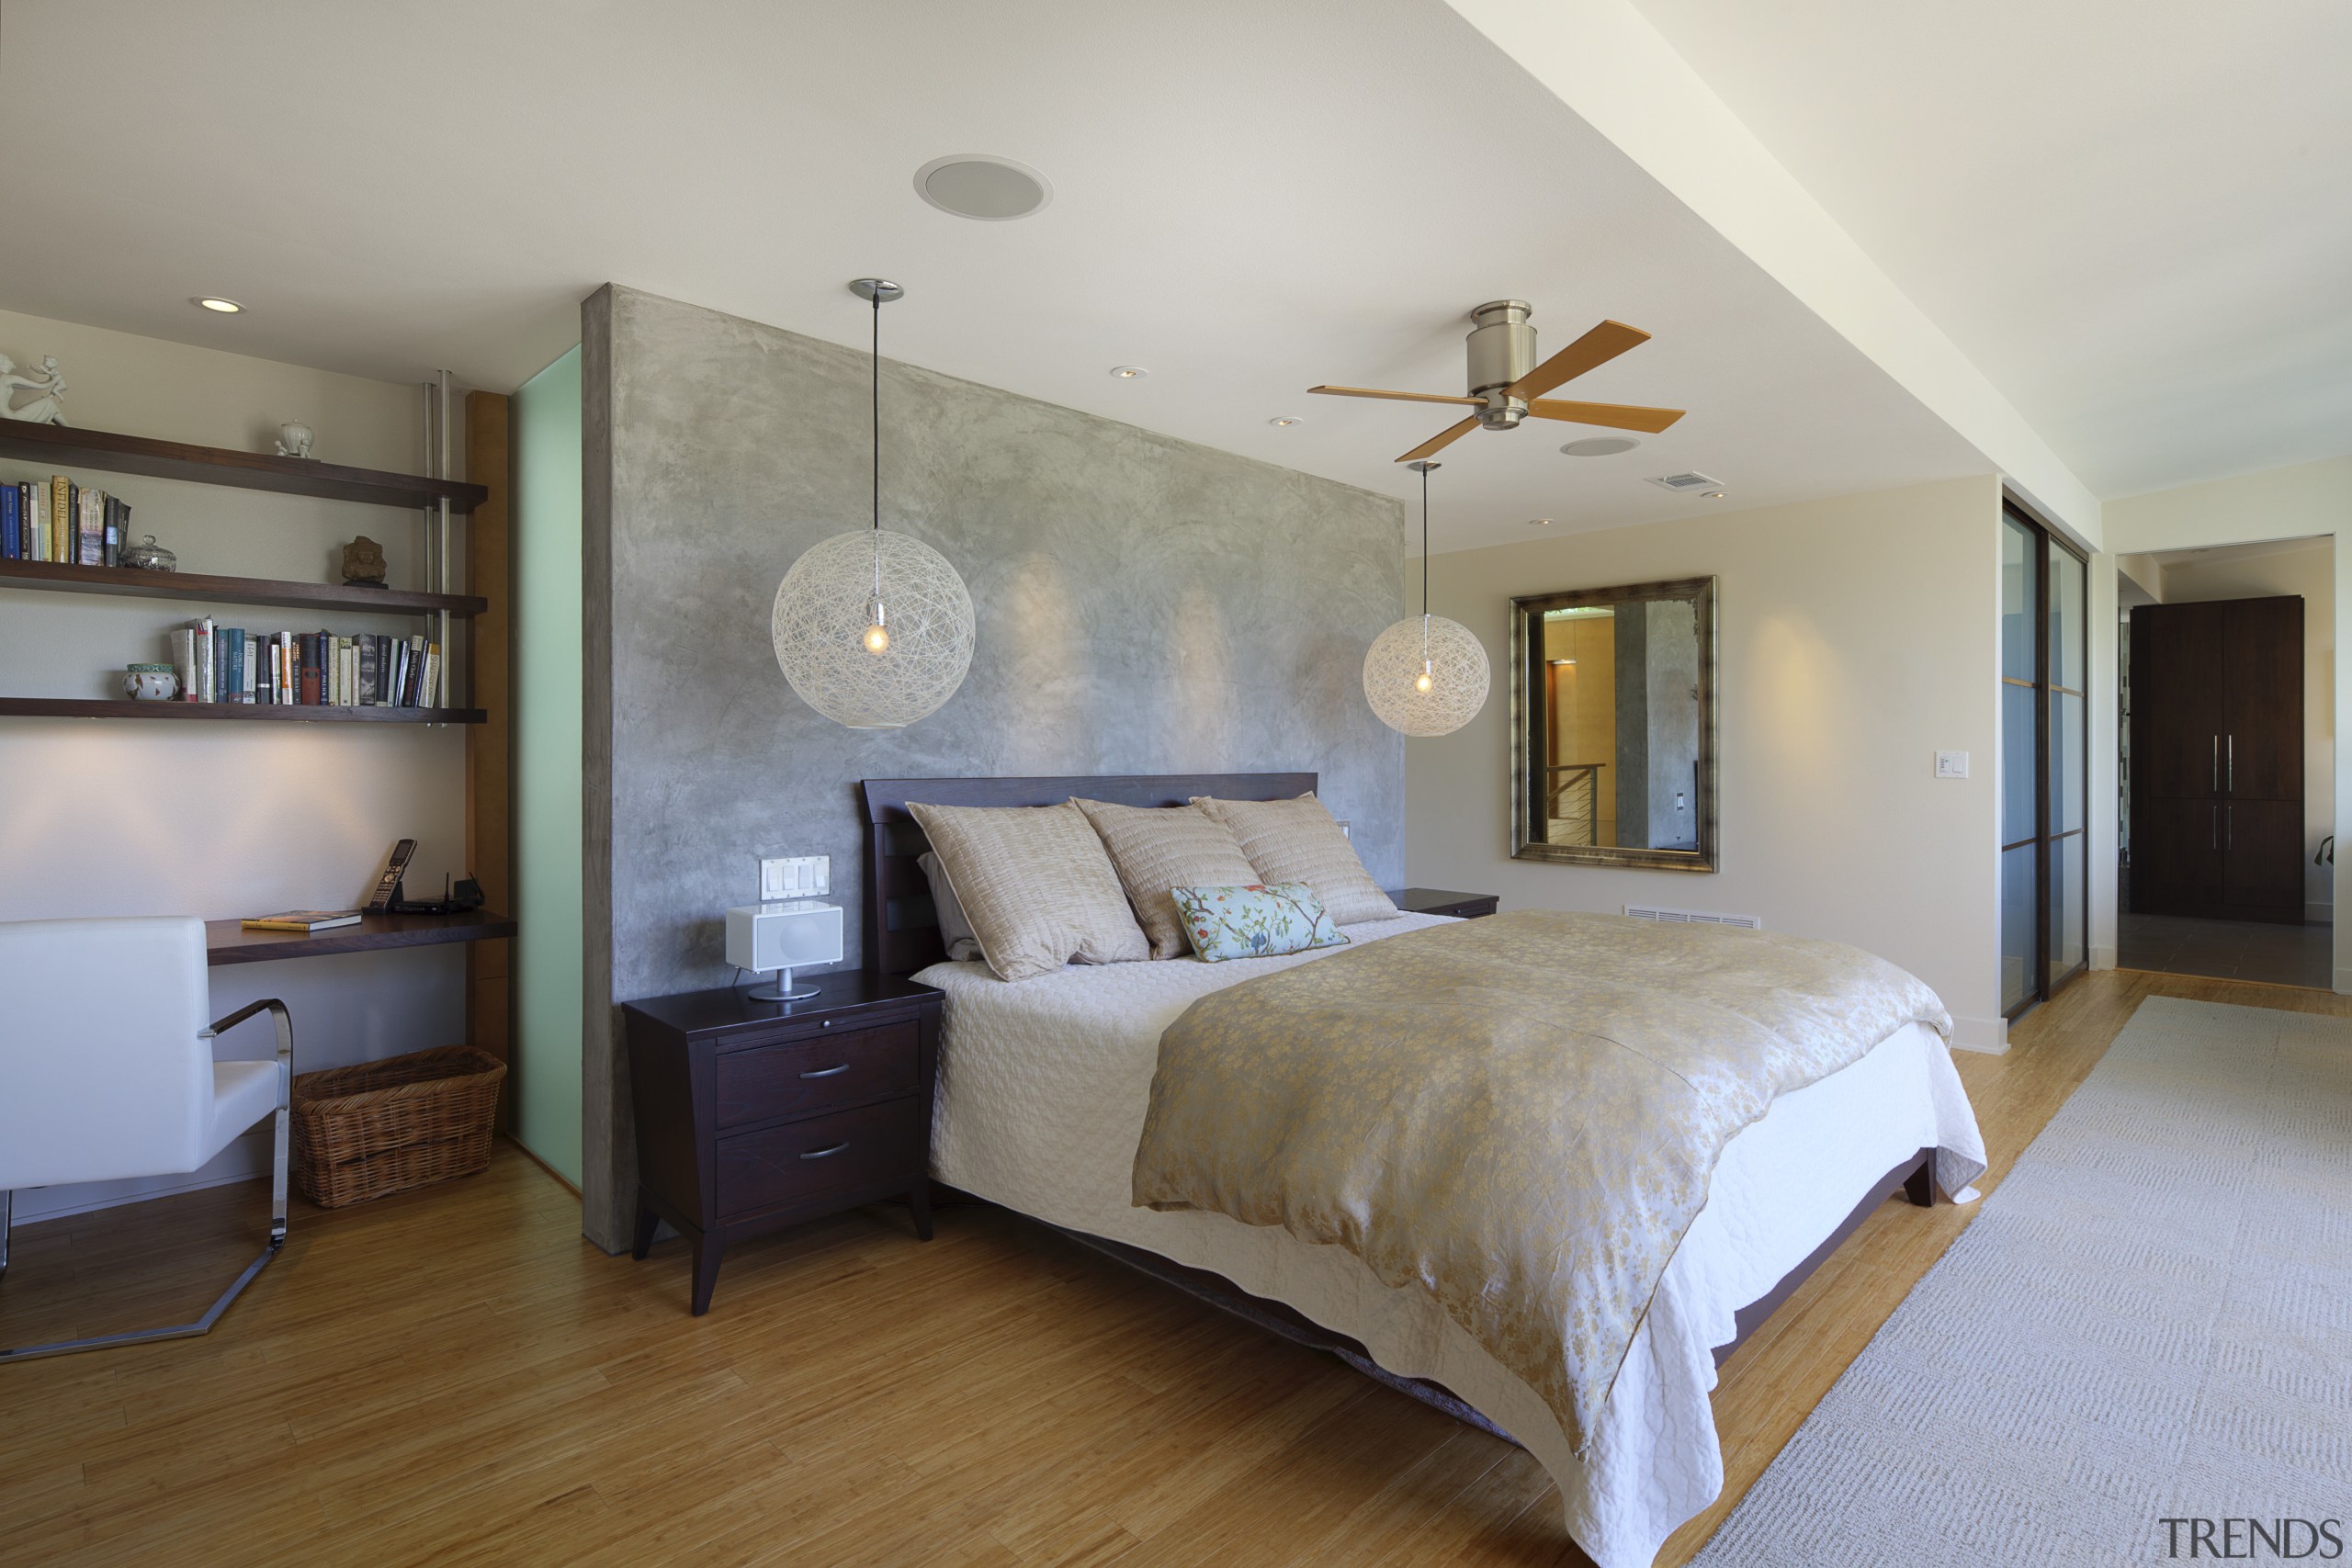 View of bedroom with wooden flooring, double bed bed frame, bedroom, ceiling, estate, floor, home, house, interior design, real estate, room, suite, wall, gray